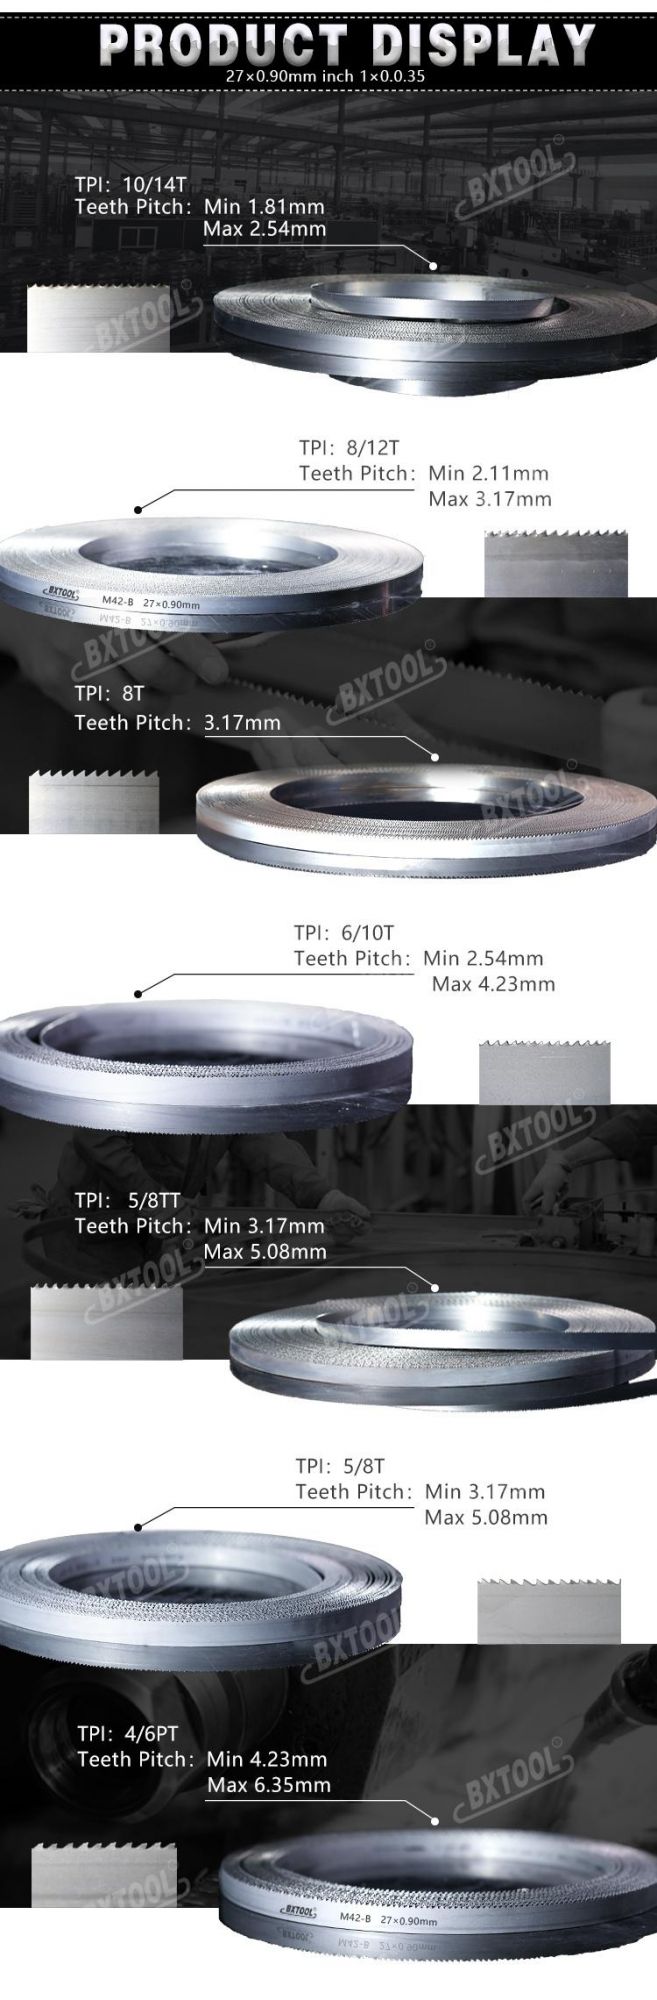 China Manufacturer M42/B Bimetal B and Saw Blade for Cutting Stainless Steel Die Steel